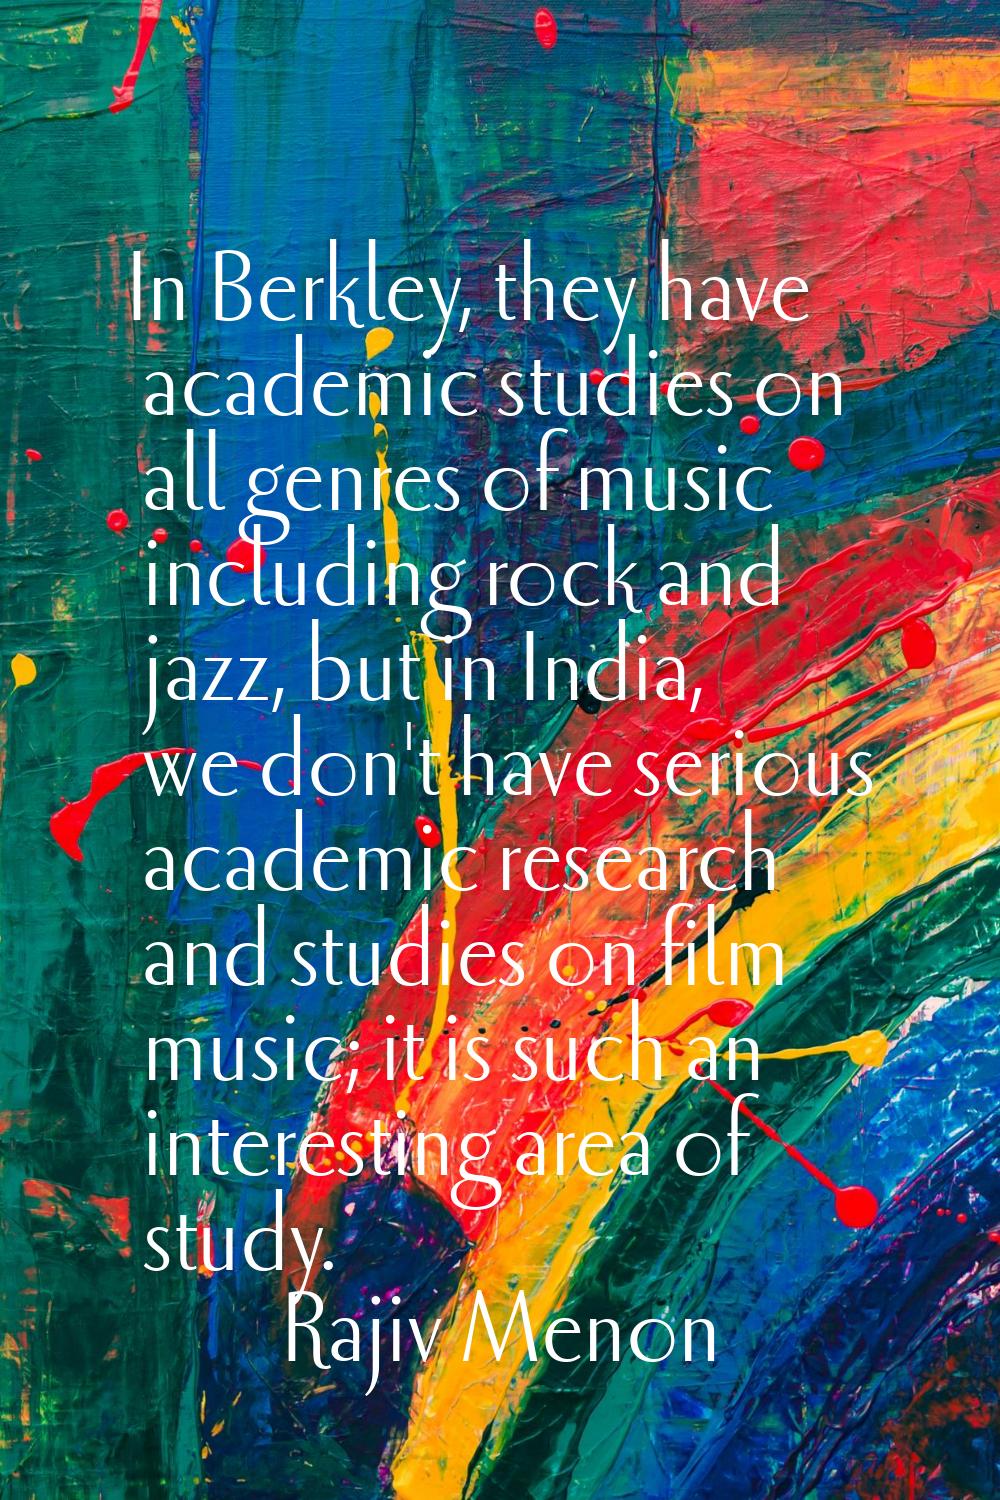 In Berkley, they have academic studies on all genres of music including rock and jazz, but in India